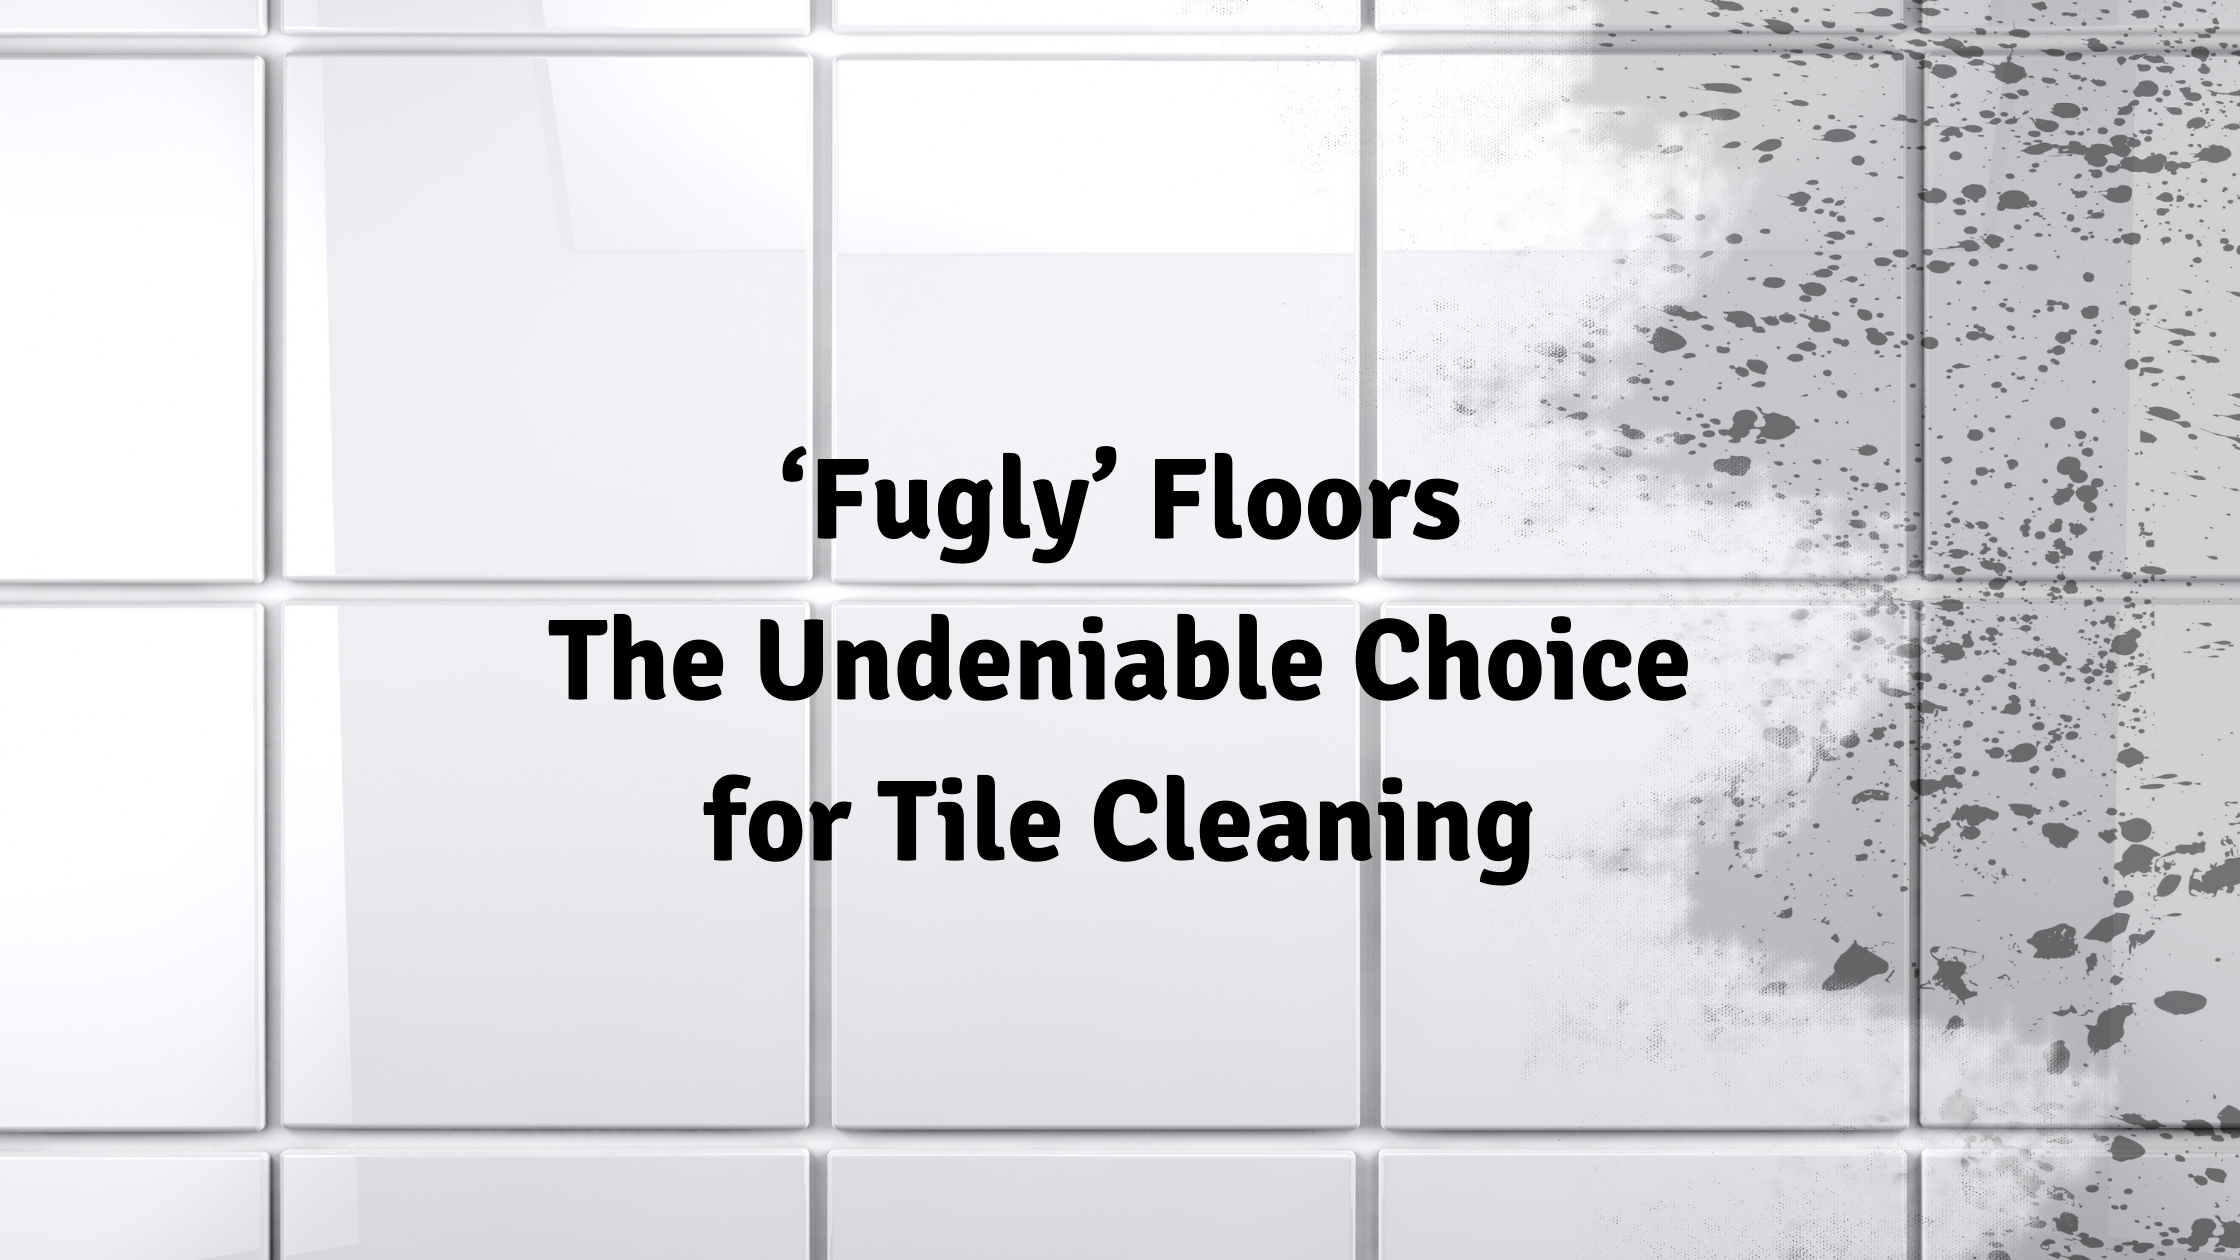 ‘Fugly’ Floors – The Undeniable Choice for Tile Cleaning 4